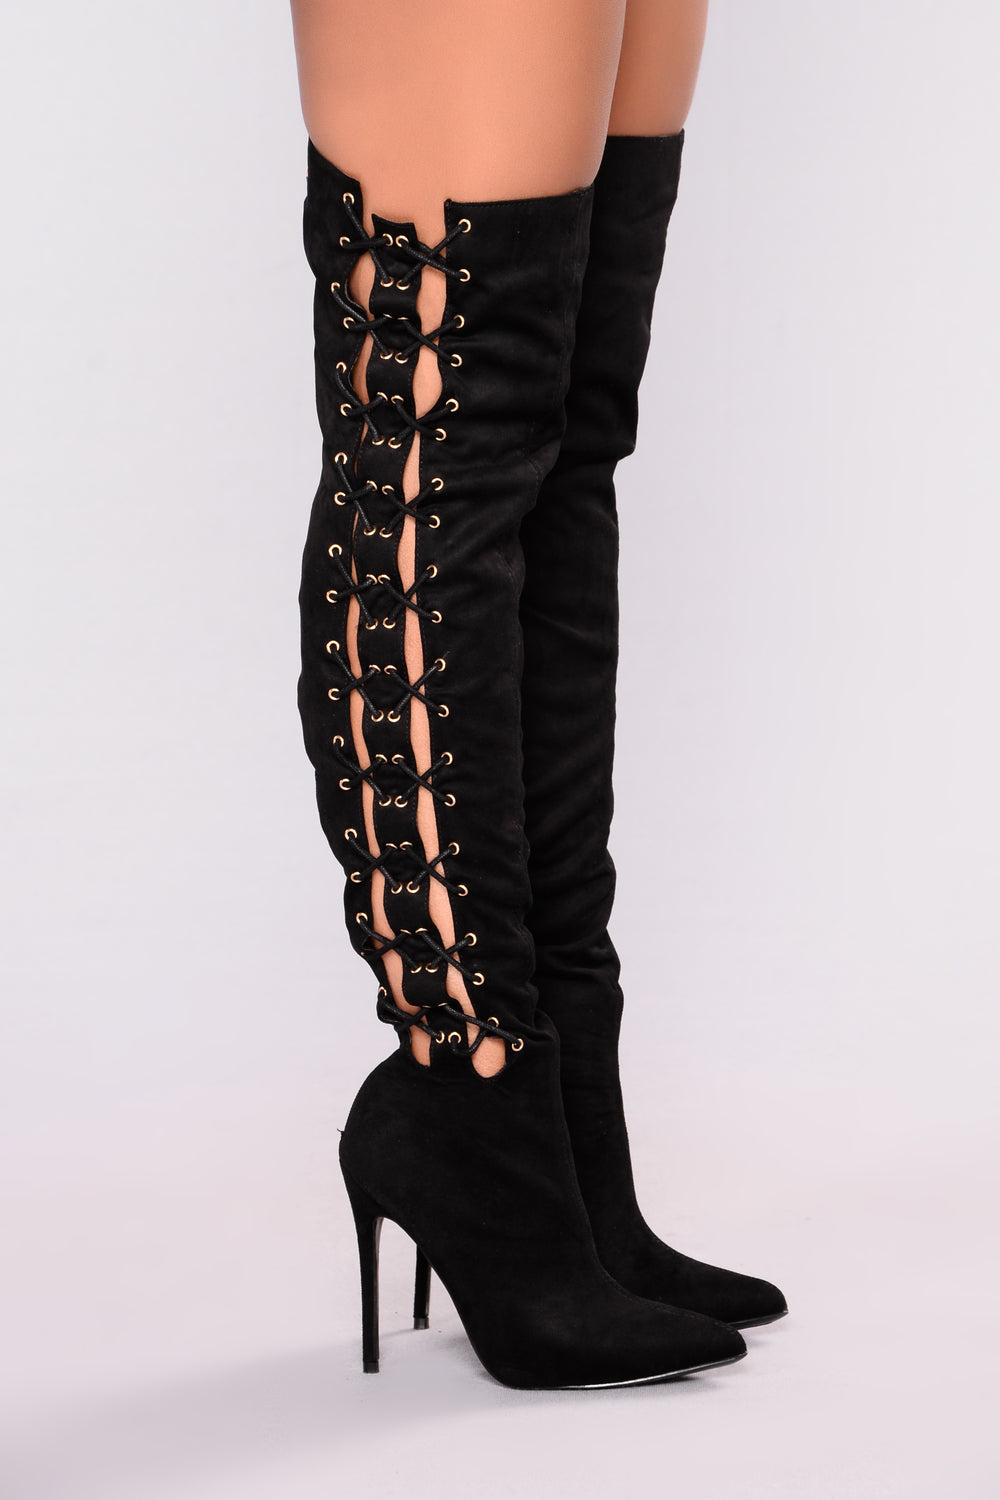 All Lace Up Heel Boot - Black